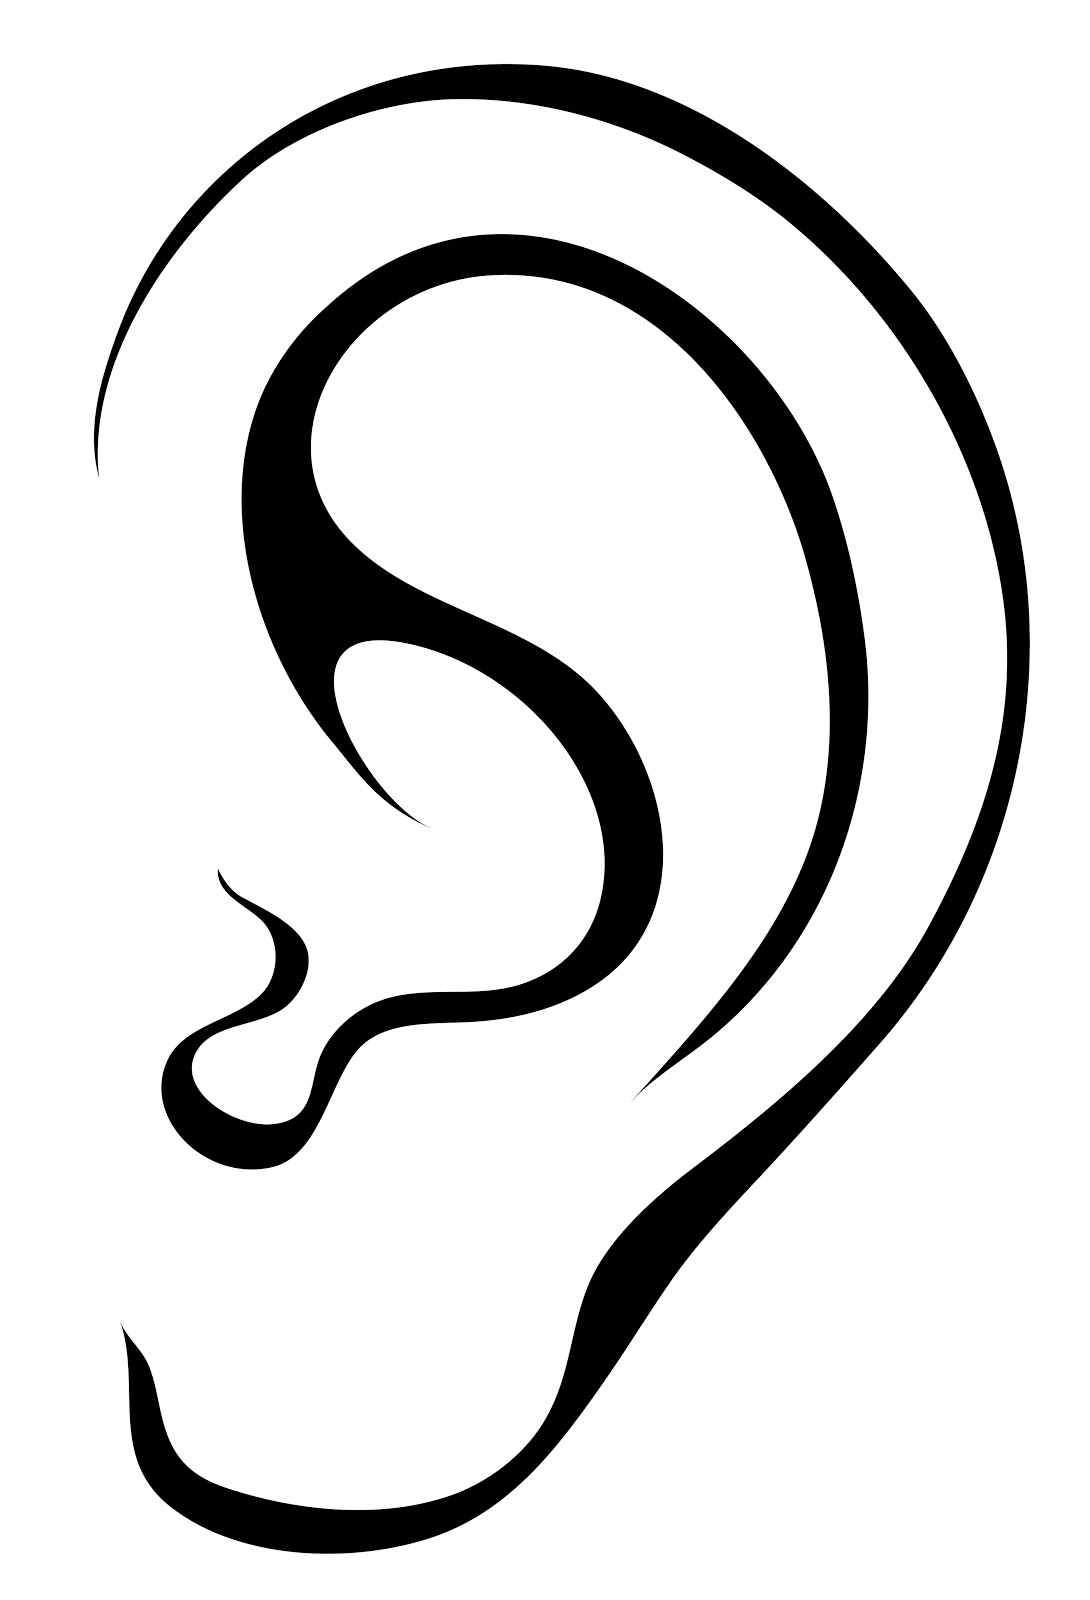 Ear clipart, Ear Transparent FREE for download on